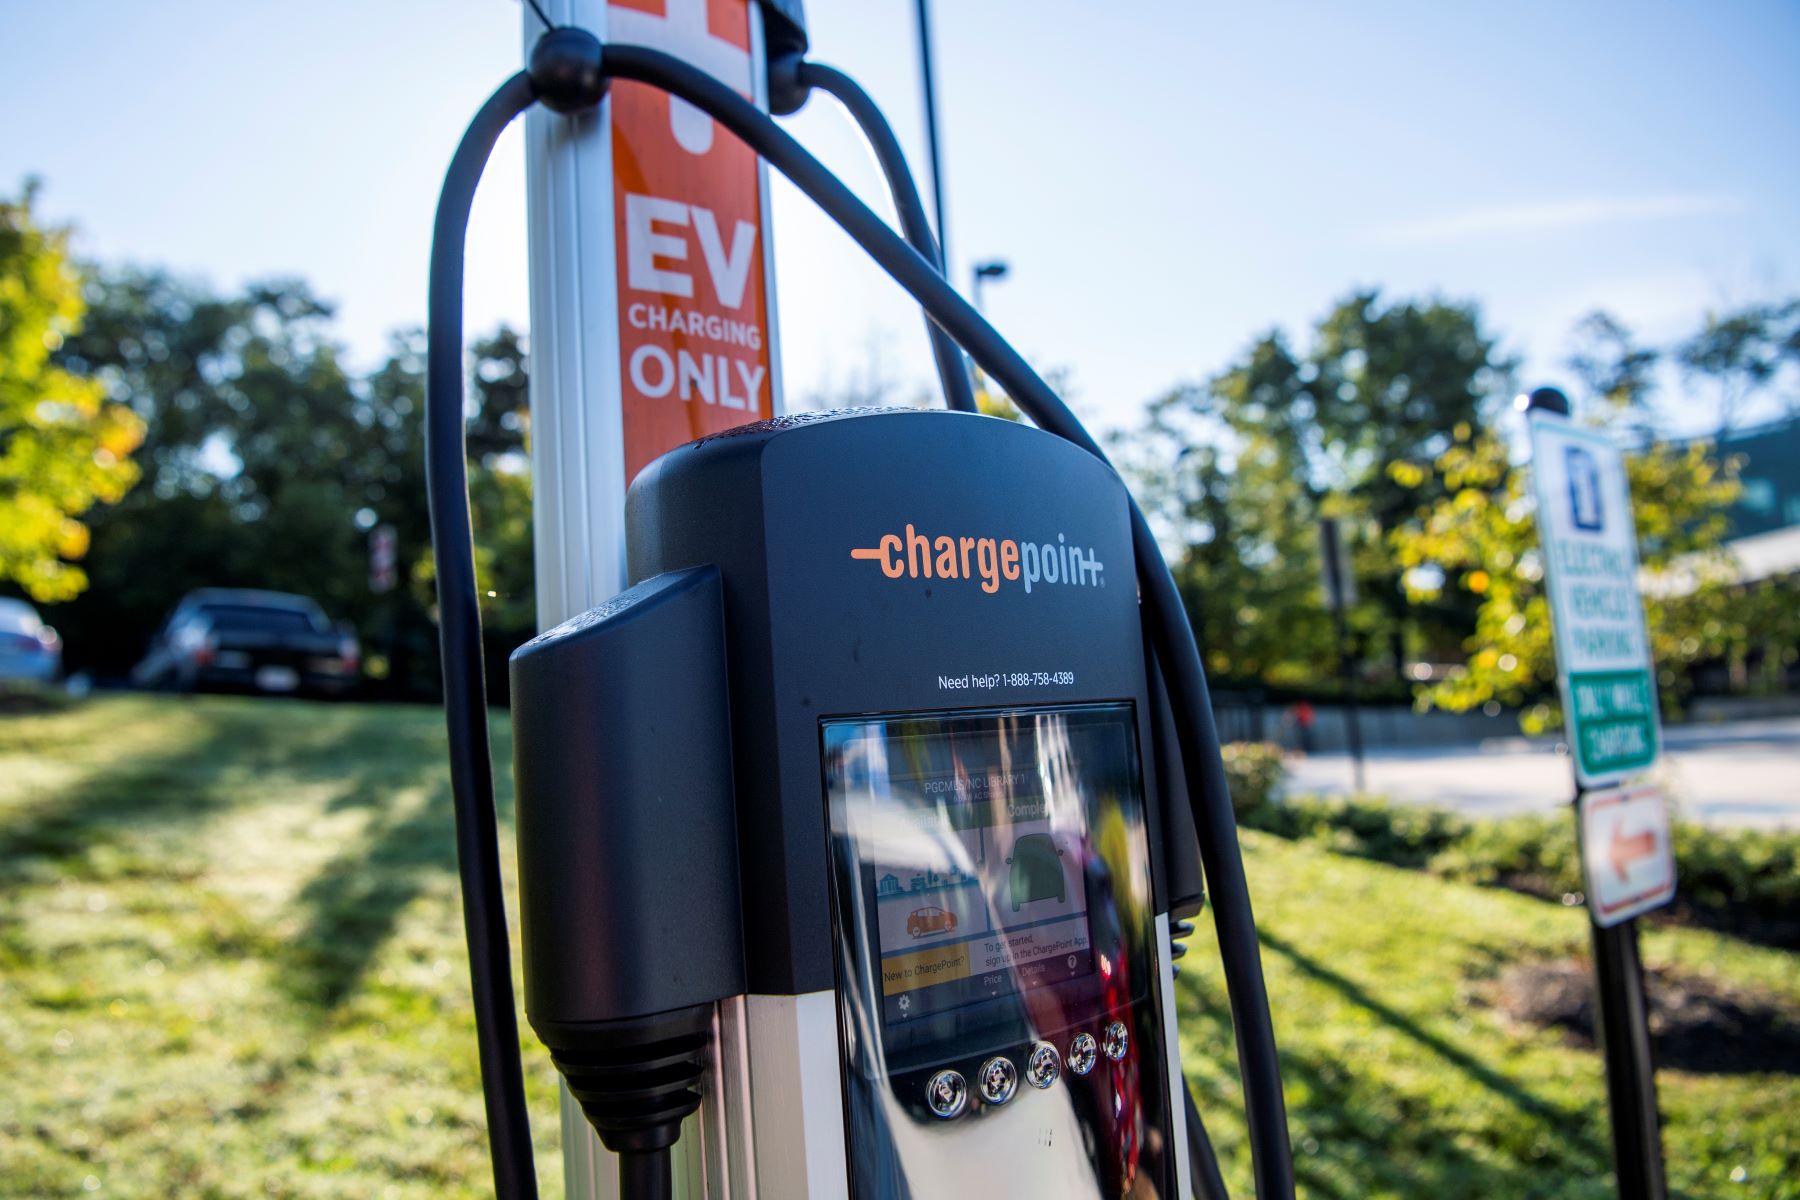 An EV ChargePoint charging station in New Carrollton, Maryland